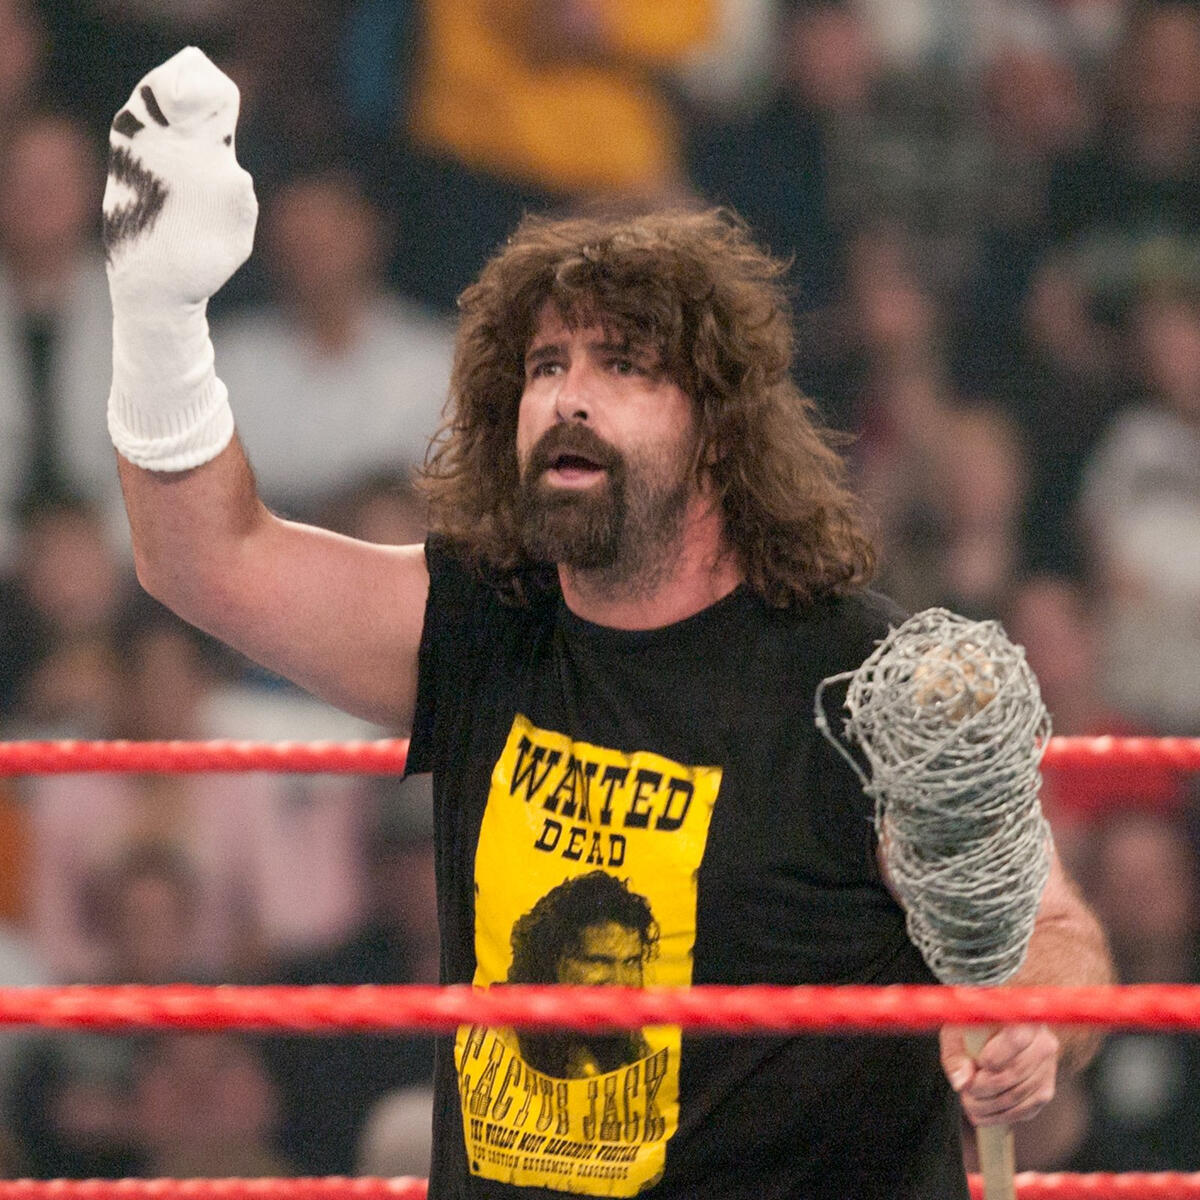 In 2004, Cactus Jack returned to battle Intercontinental Champion Randy Orton in a Hardcore Match.